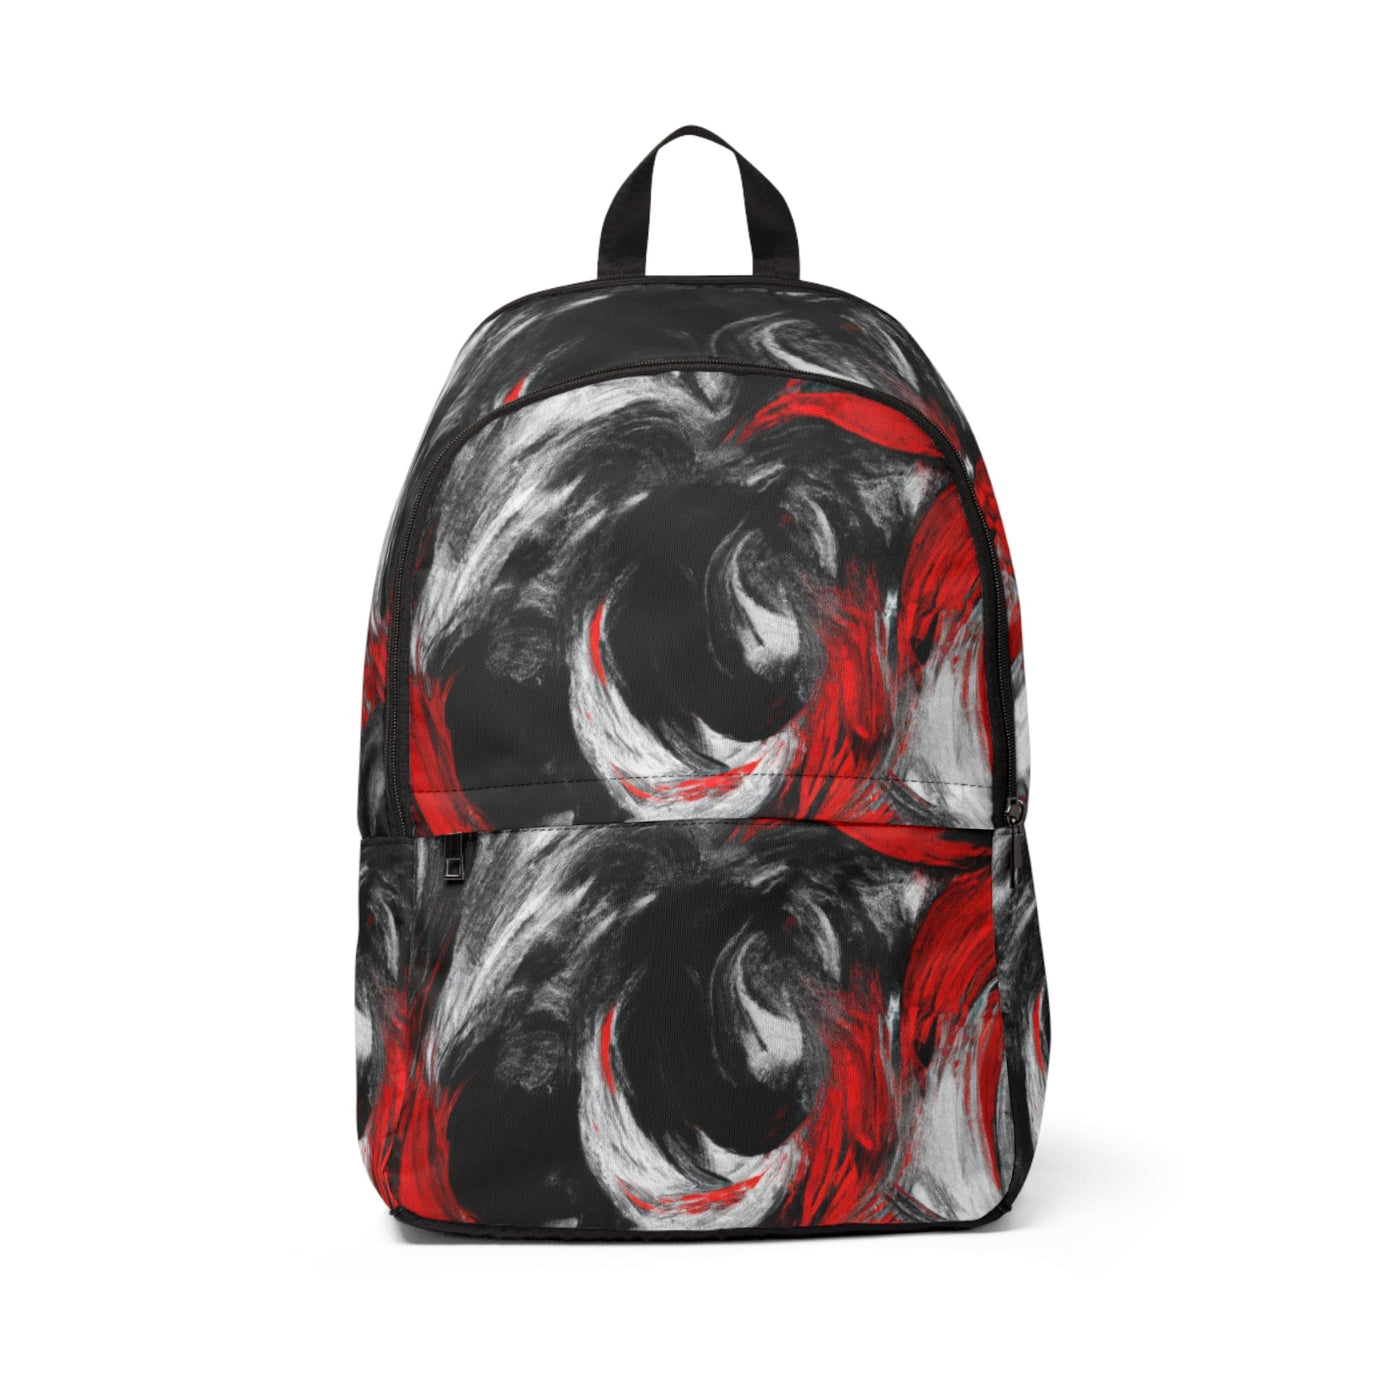 Fashion Backpack Waterproof Decorative Black Red White Abstract Seamless